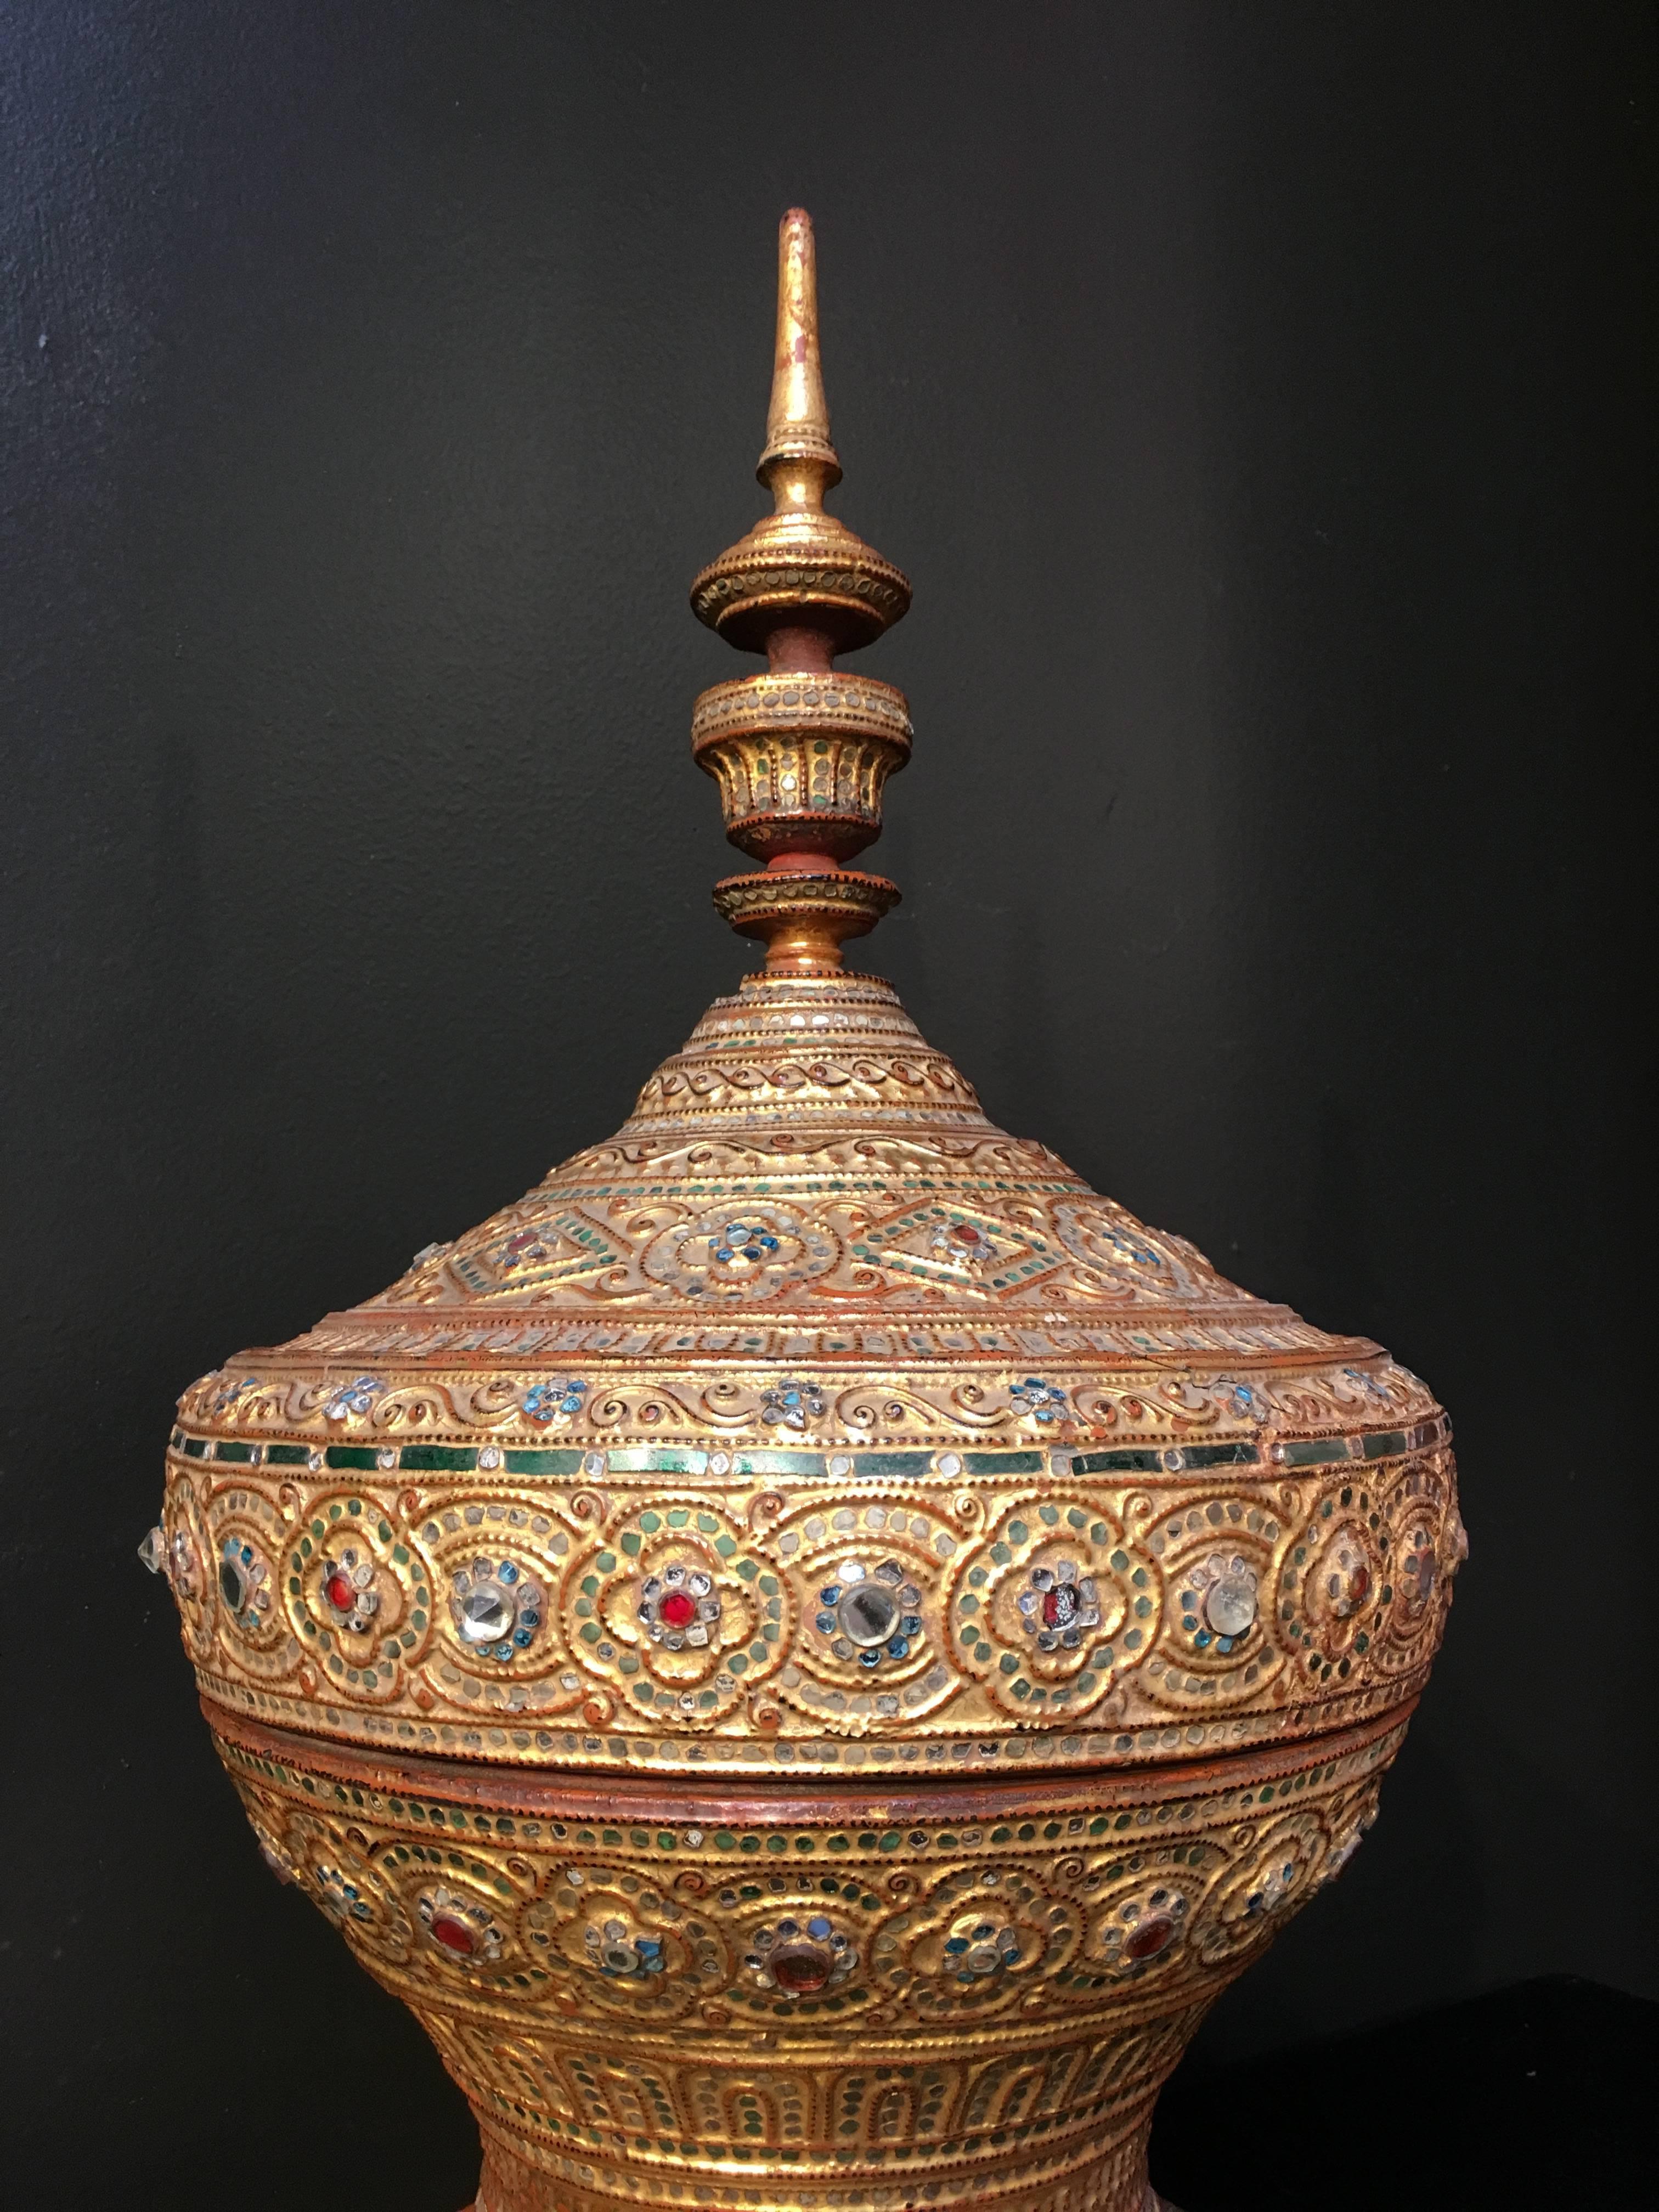 Early 20th Century Burmese Gilt Lacquer Offering Vessel, Hsun-Ok, Mandalay Period, circa 1900 For Sale